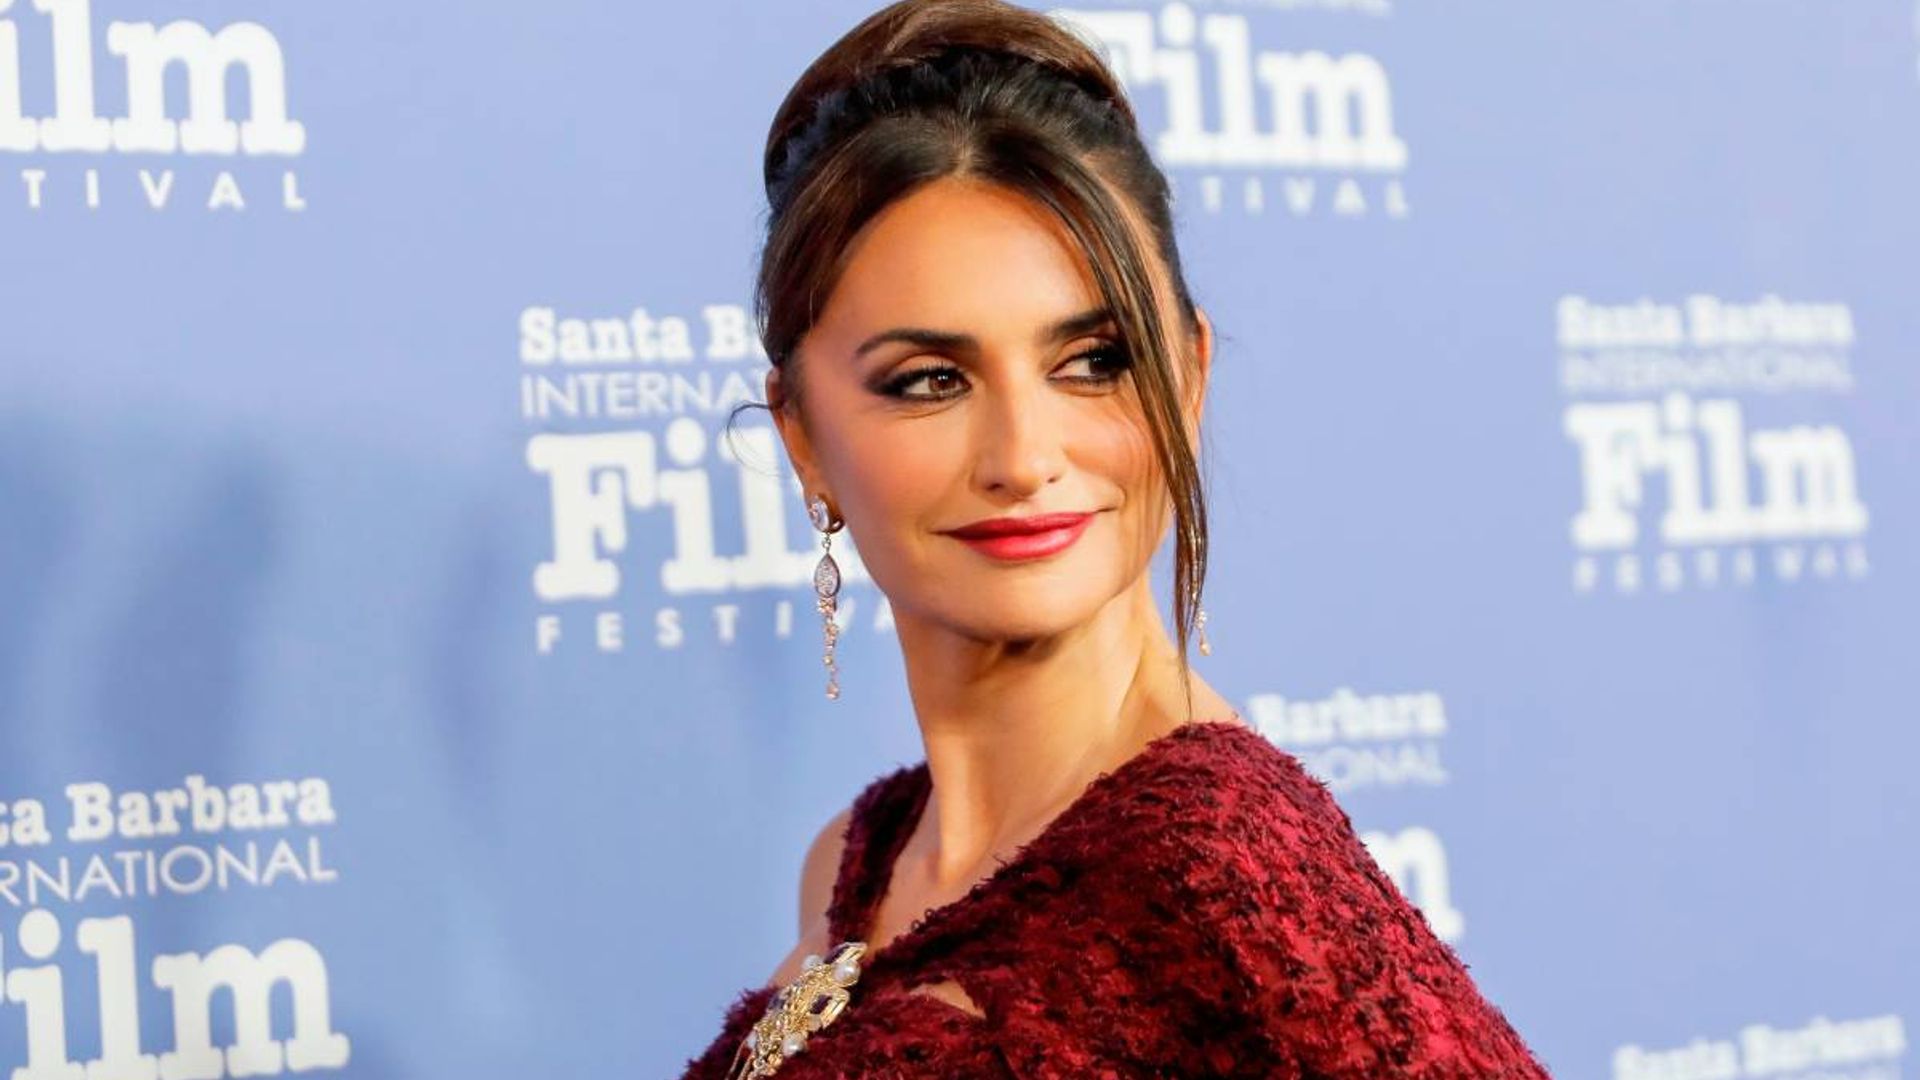 Penelope Cruz sparkles in a stunning beaded silver gown | Red carpet dresses,  Penelope cruz, Silver gown